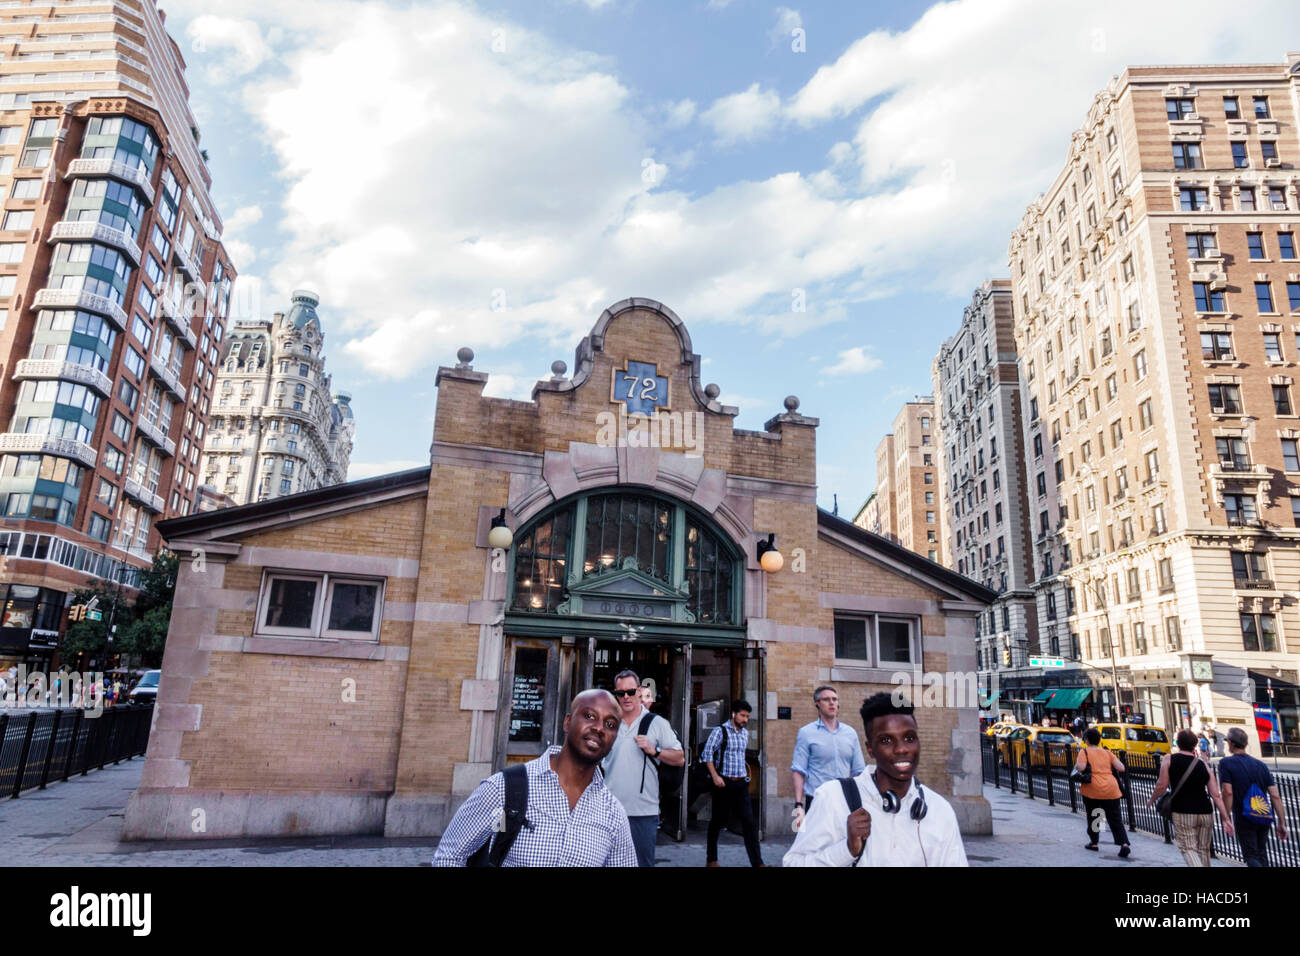 New York City,NY NYC Manhattan,Upper West Side,72nd Street Station,IRT Broadway-Seventh Avenue Line,subway,control house,entrance,Black adult,adults,m Stock Photo